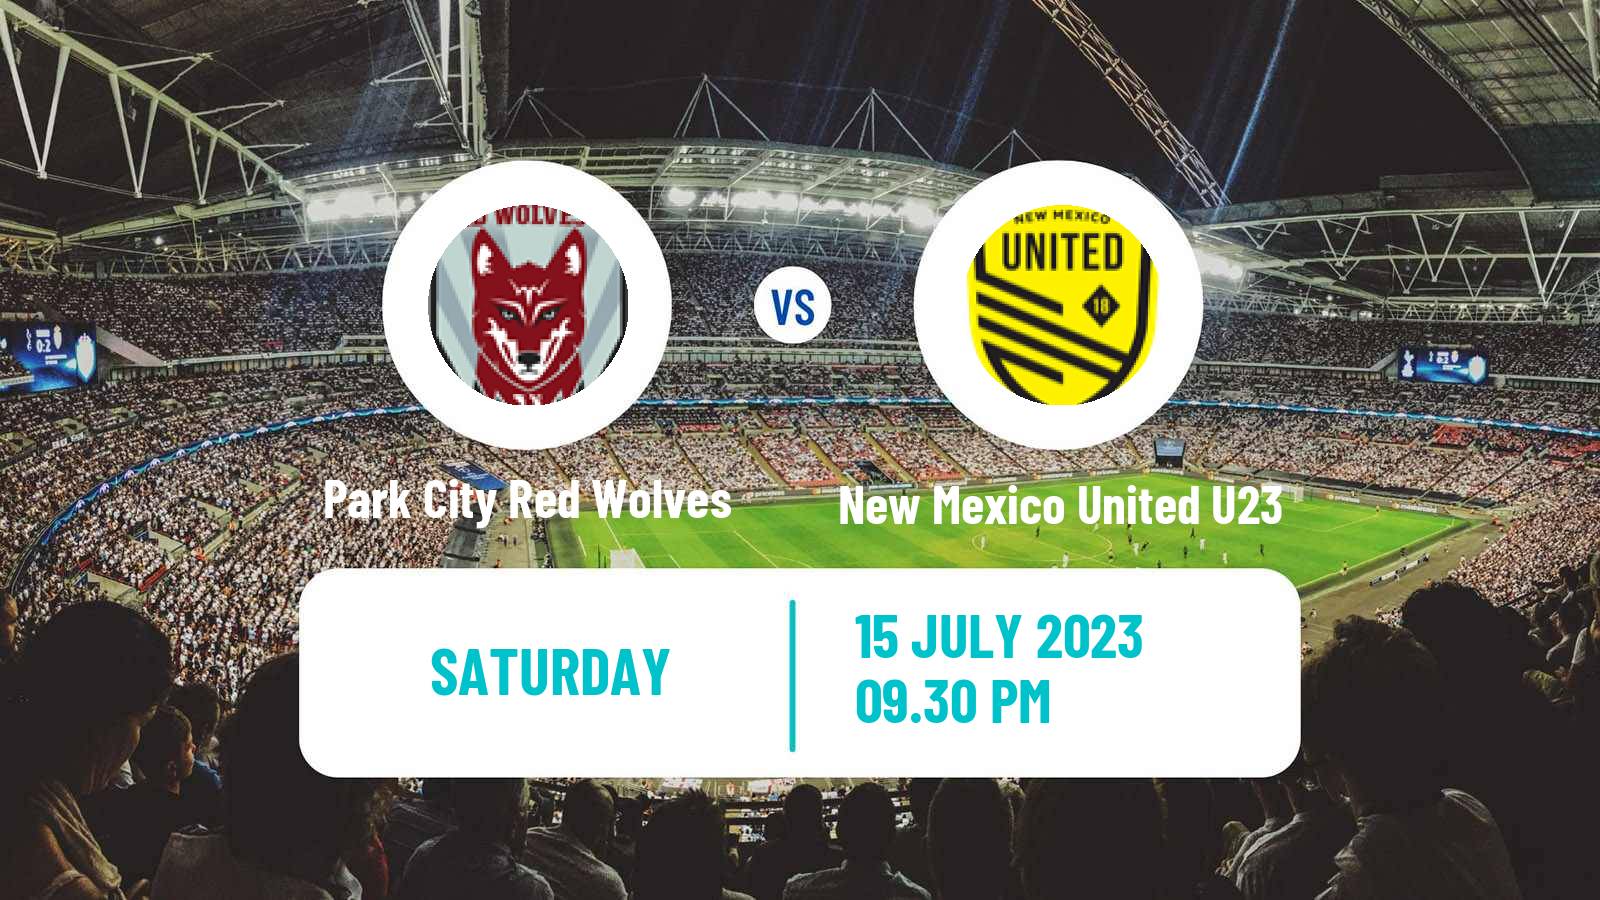 Soccer USL League Two Park City Red Wolves - New Mexico United U23